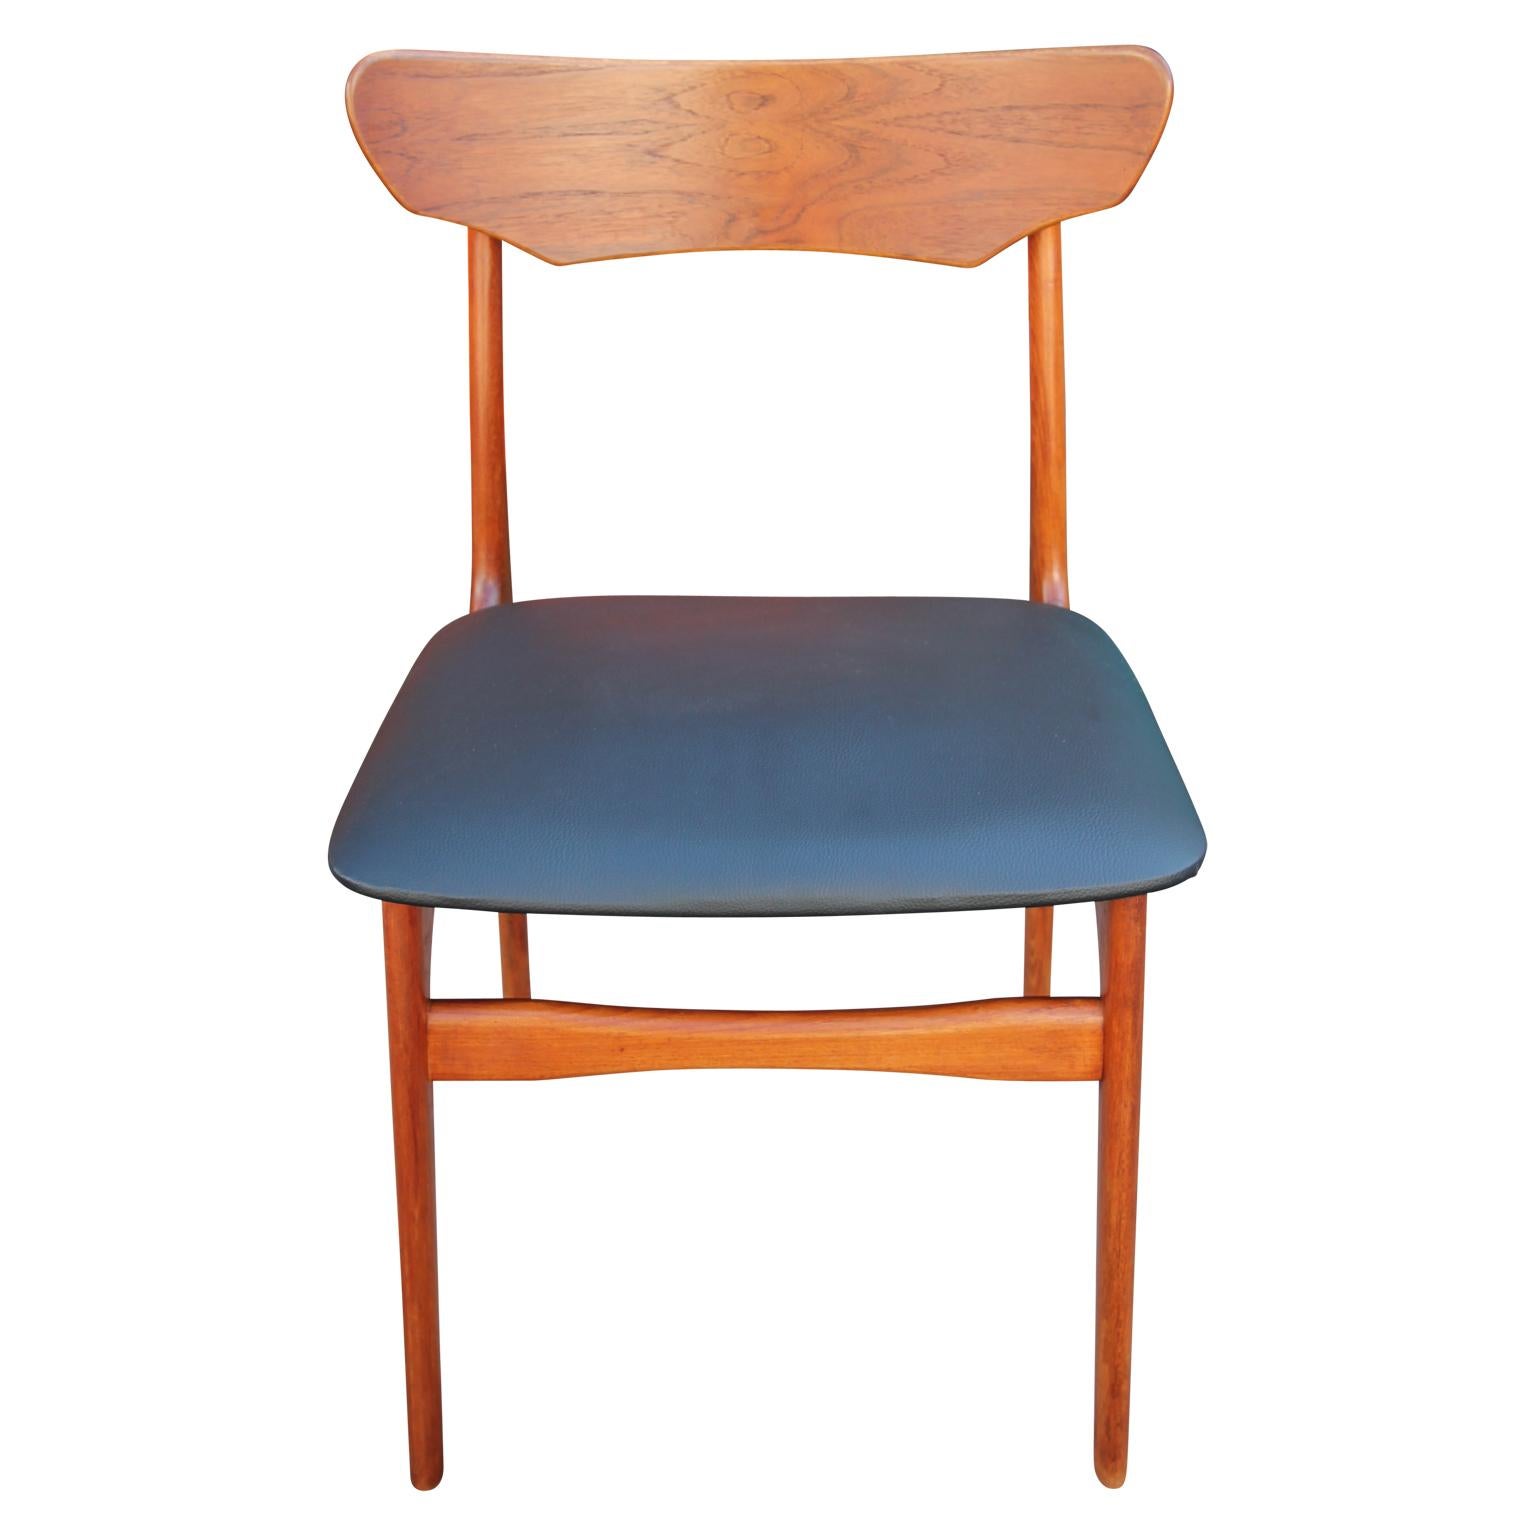 Set of 4 teak dining chairs with black leather seats designed by Schonning and Elgaard. Stunning example of Danish made Mid-Century Modern design.

 